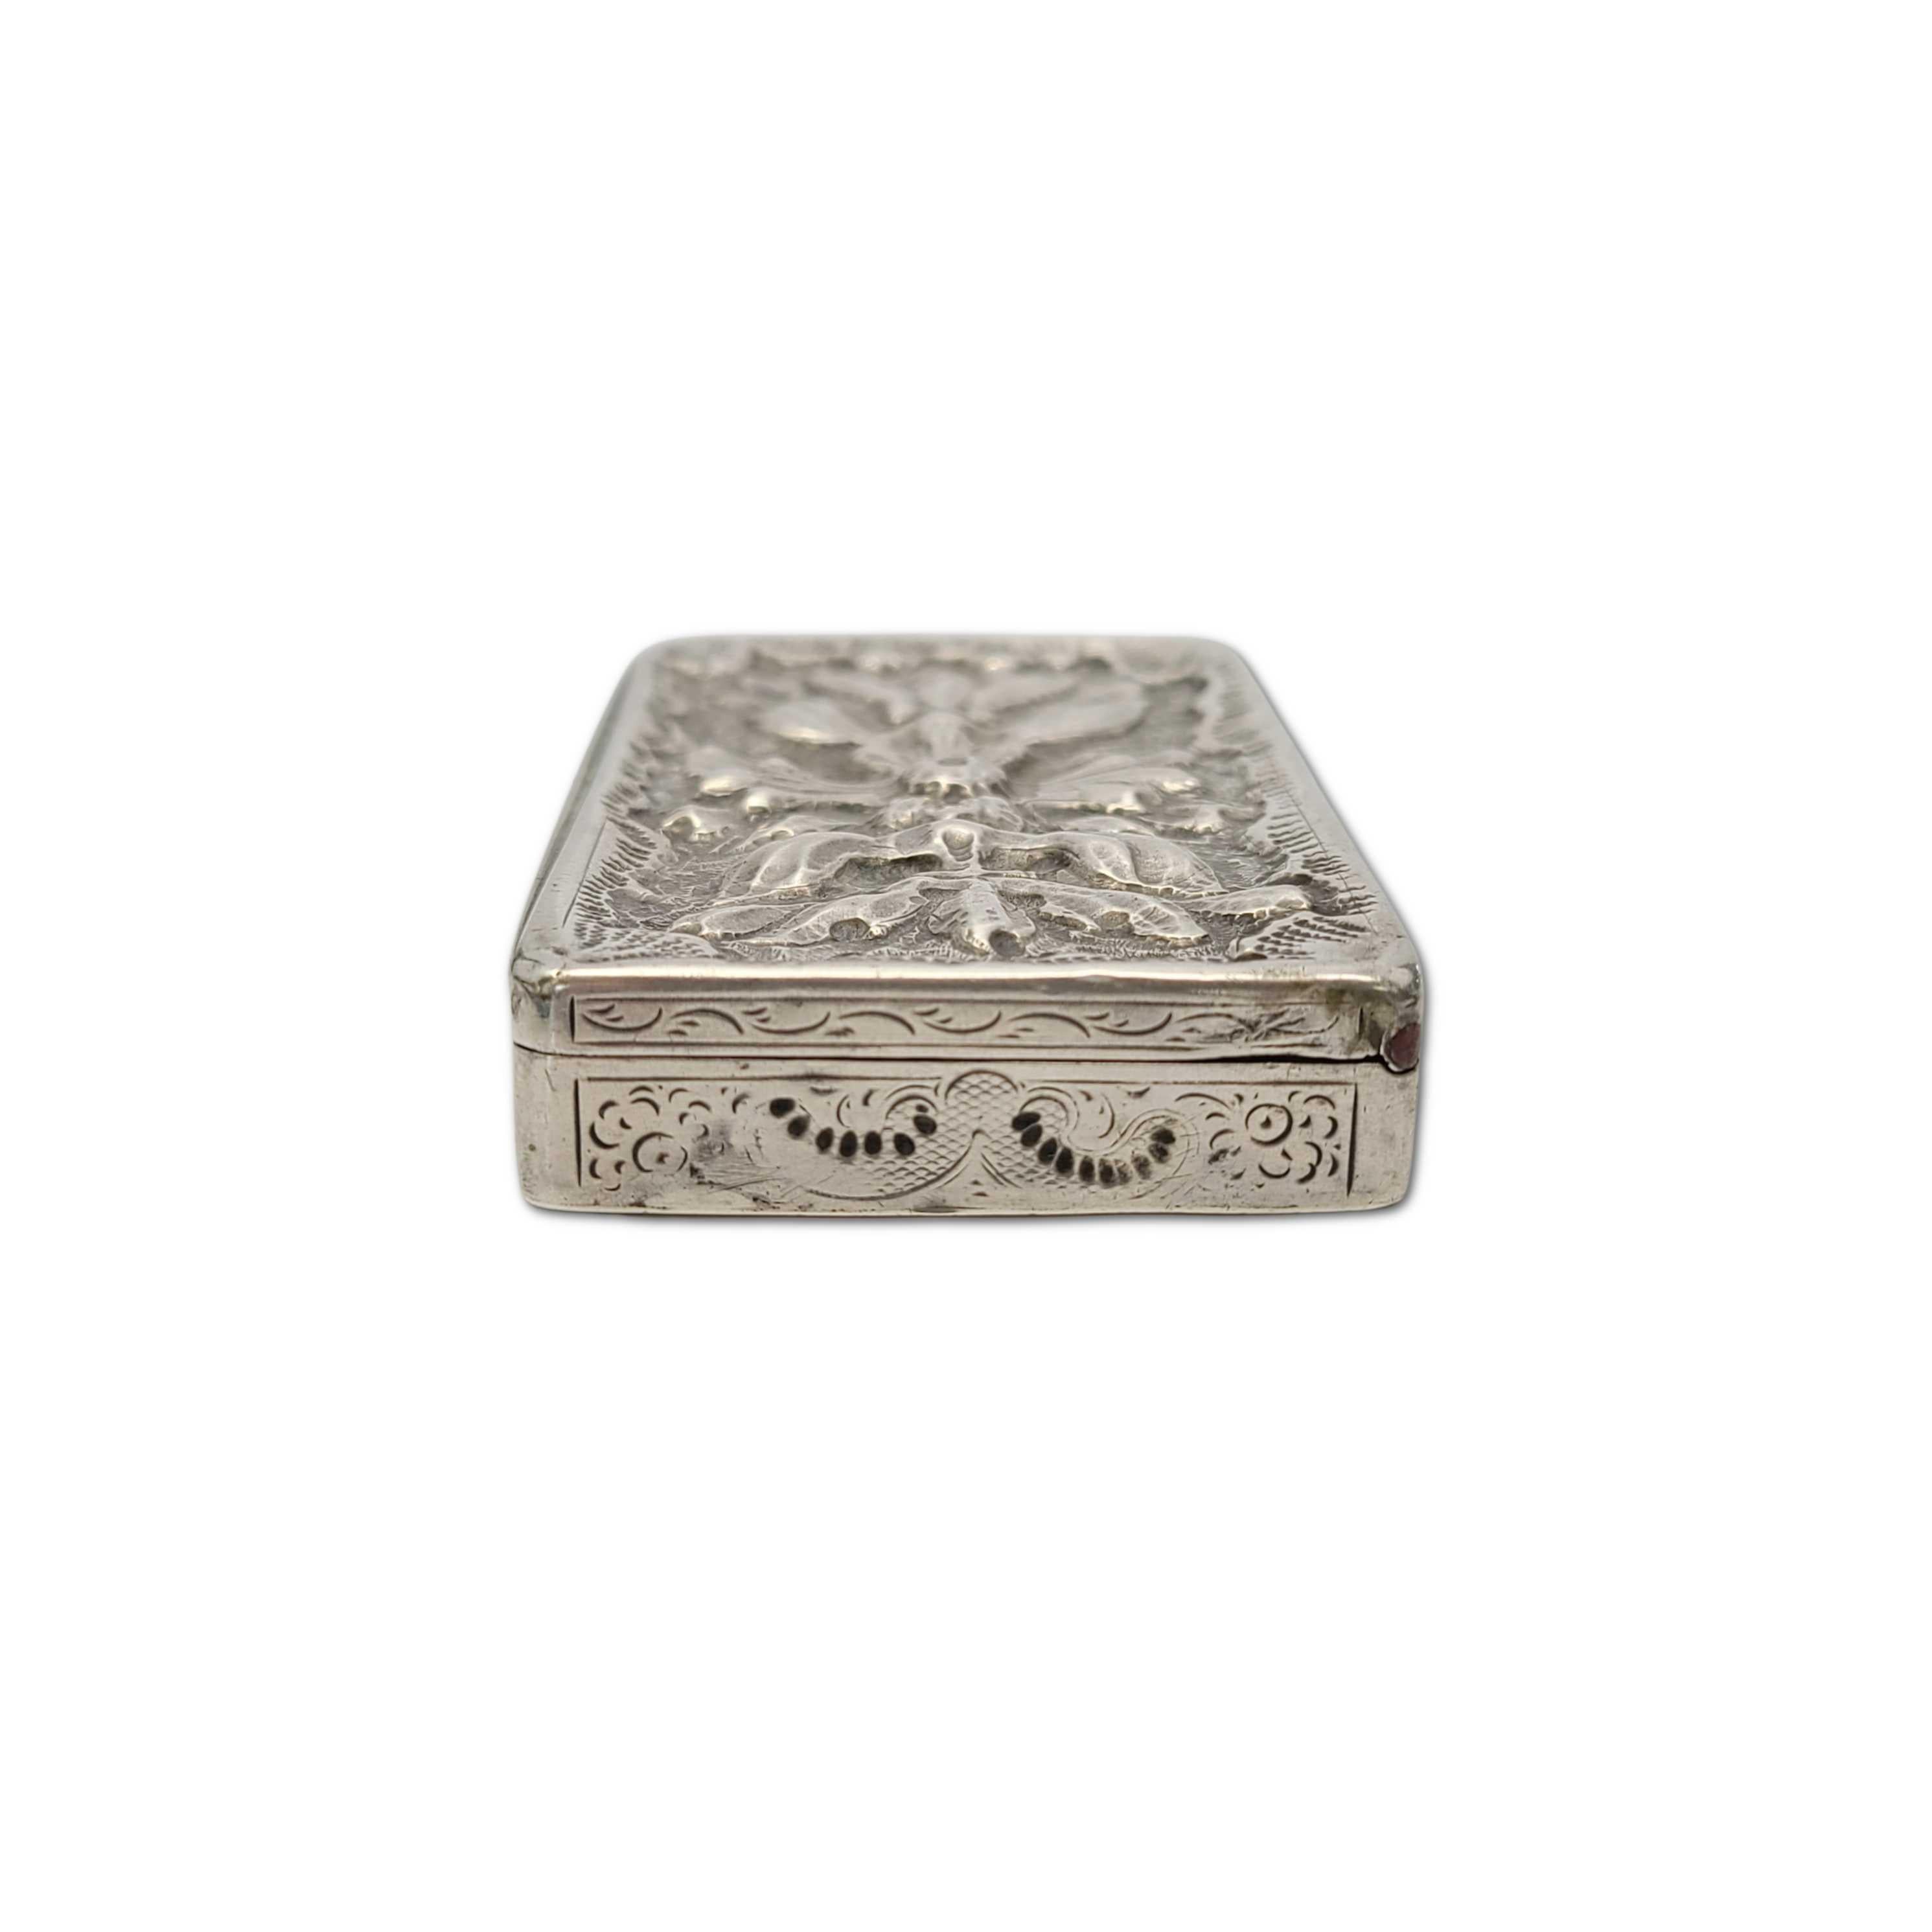 20th Century Antique Sterling Silver Repousse Box